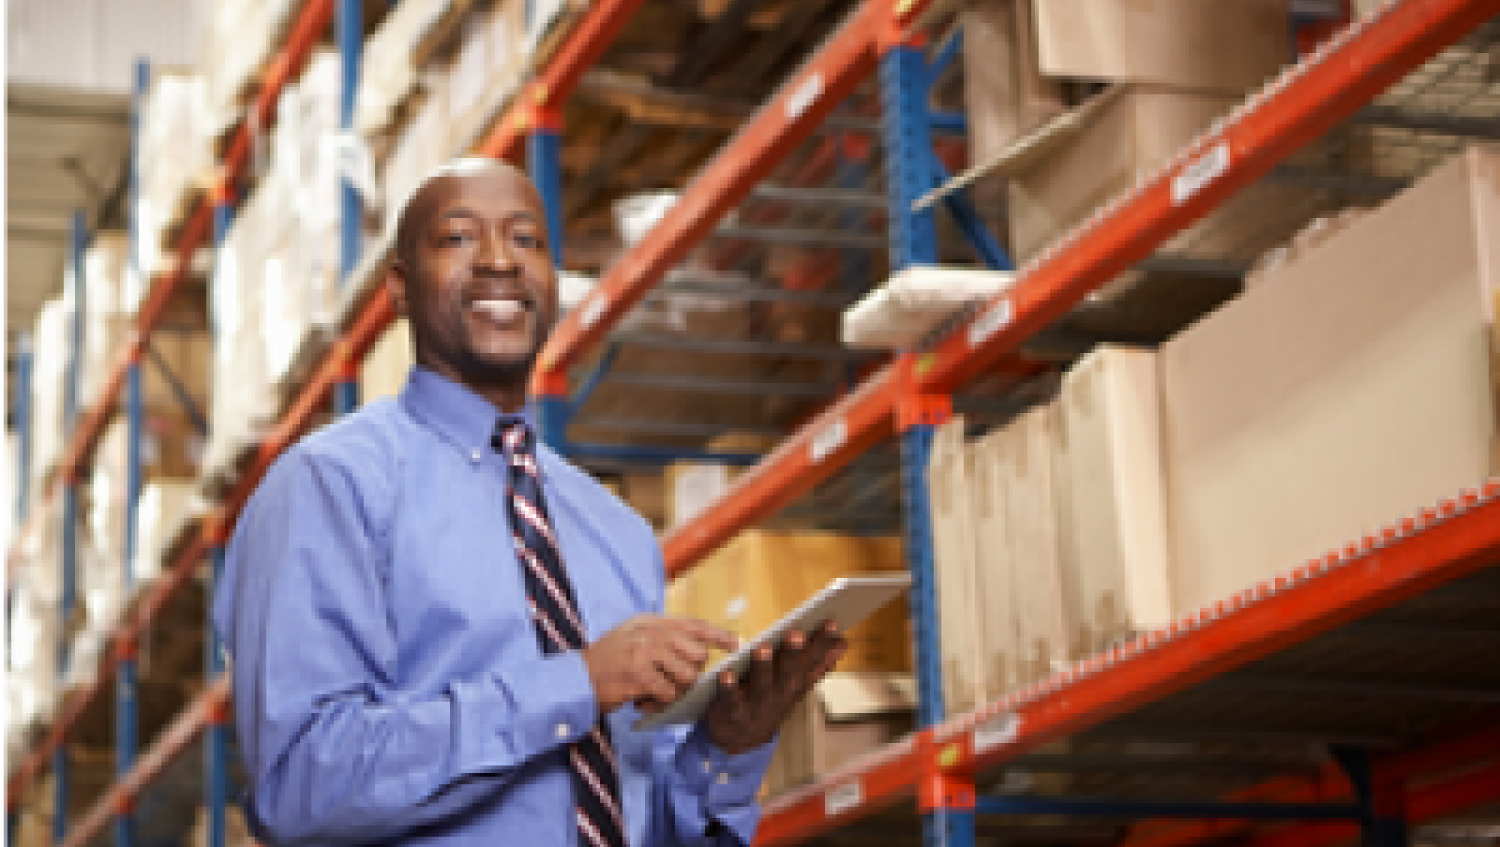 Smiling man in shirt and tie stands next to warehouse shelves.